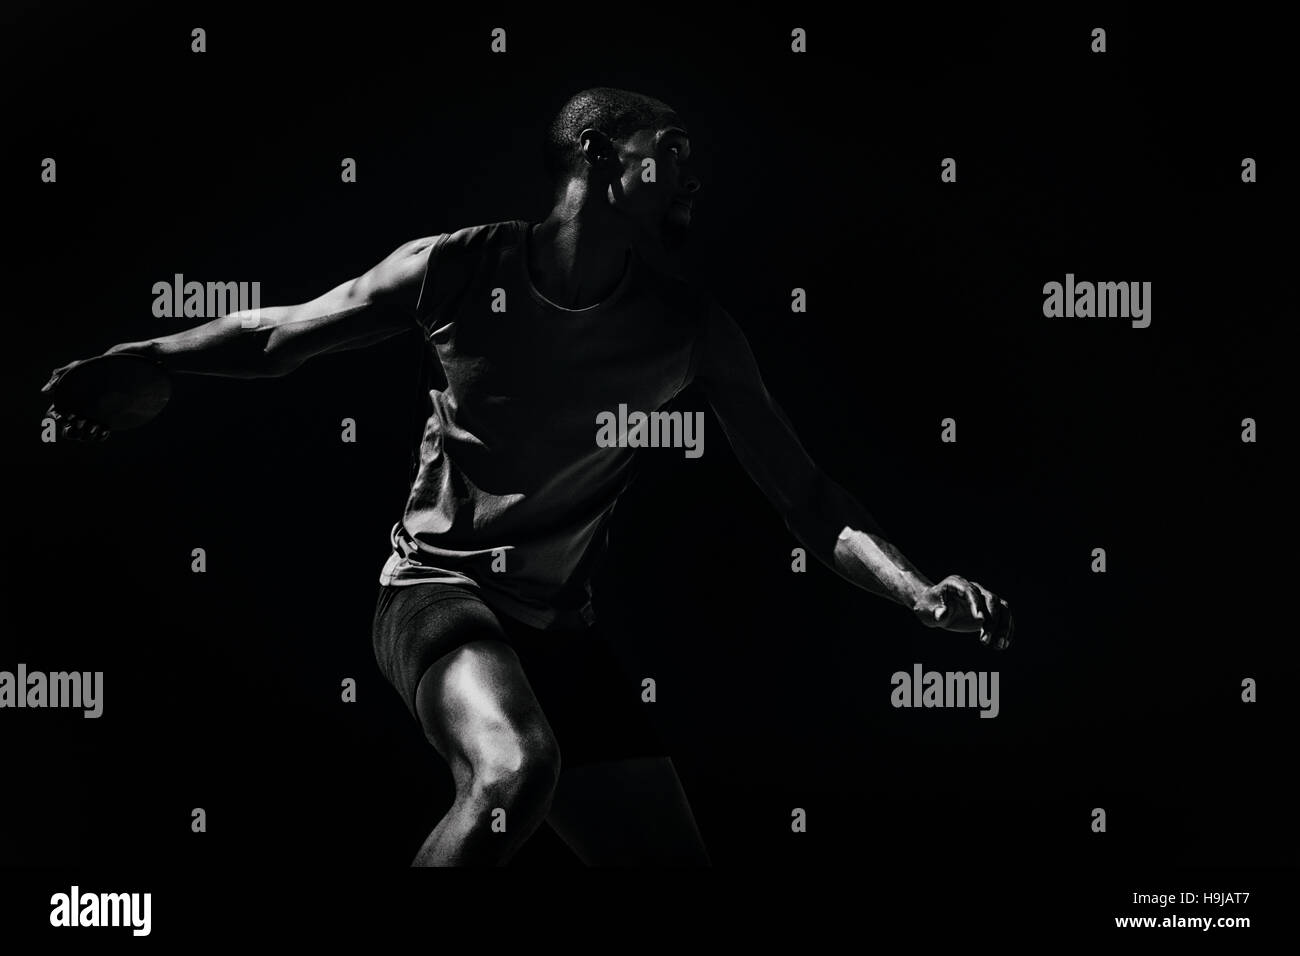 Composite image of athlete man throwing a discus Stock Photo